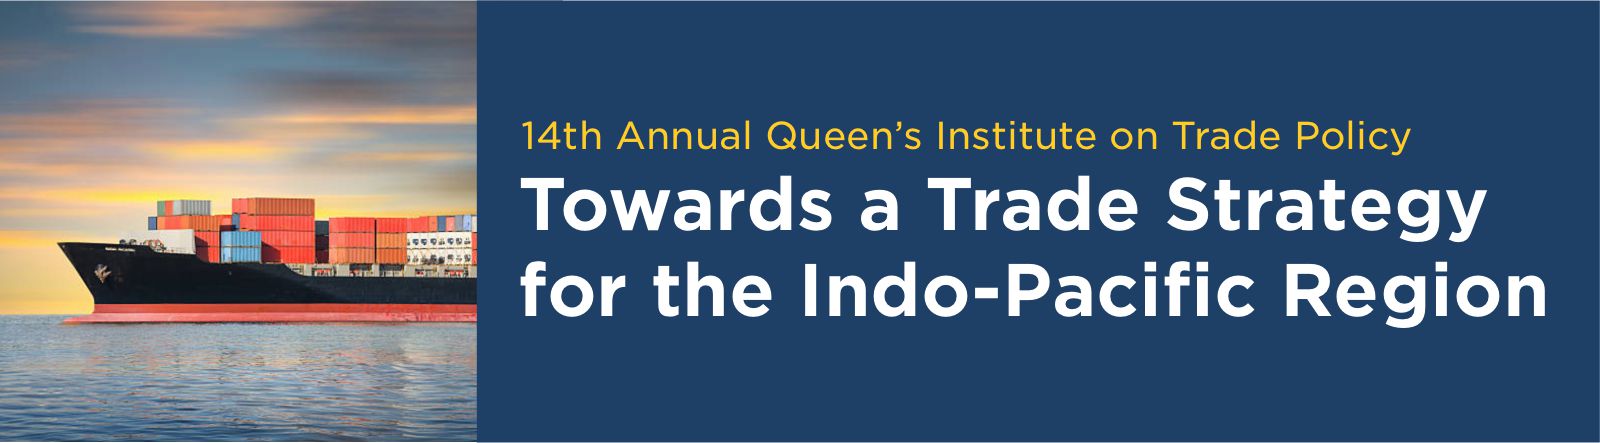 Cover image. text reads fourteenth annual queen's institute on trade policy - Towards a Trade Strategy for the Indo-Pacific Region